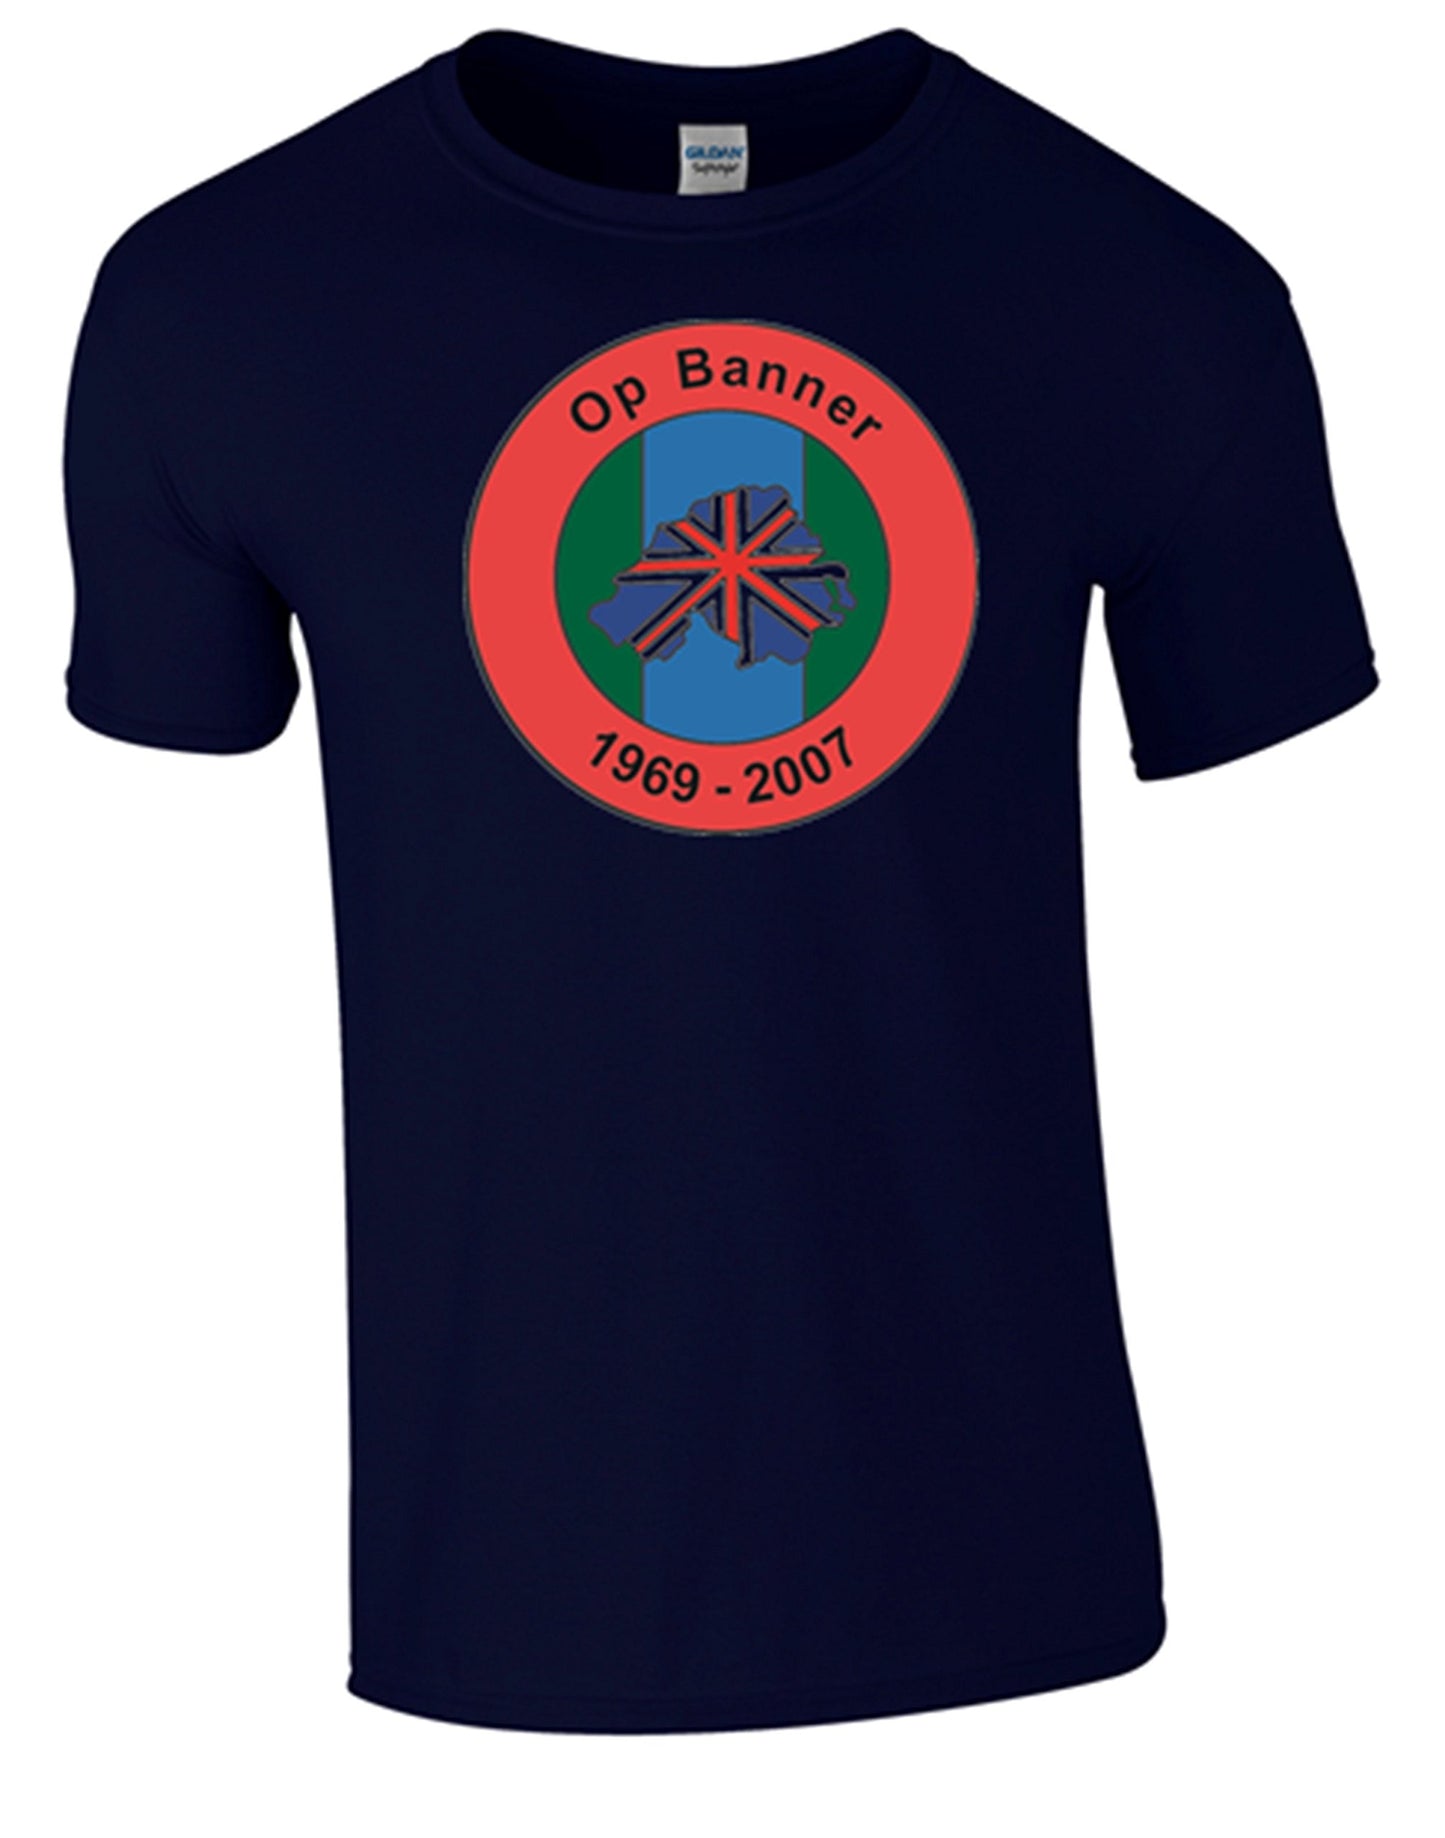 Northern Ireland Ops Banner T-Shirt (M, Blue) - Army 1157 kit Army 1157 Kit